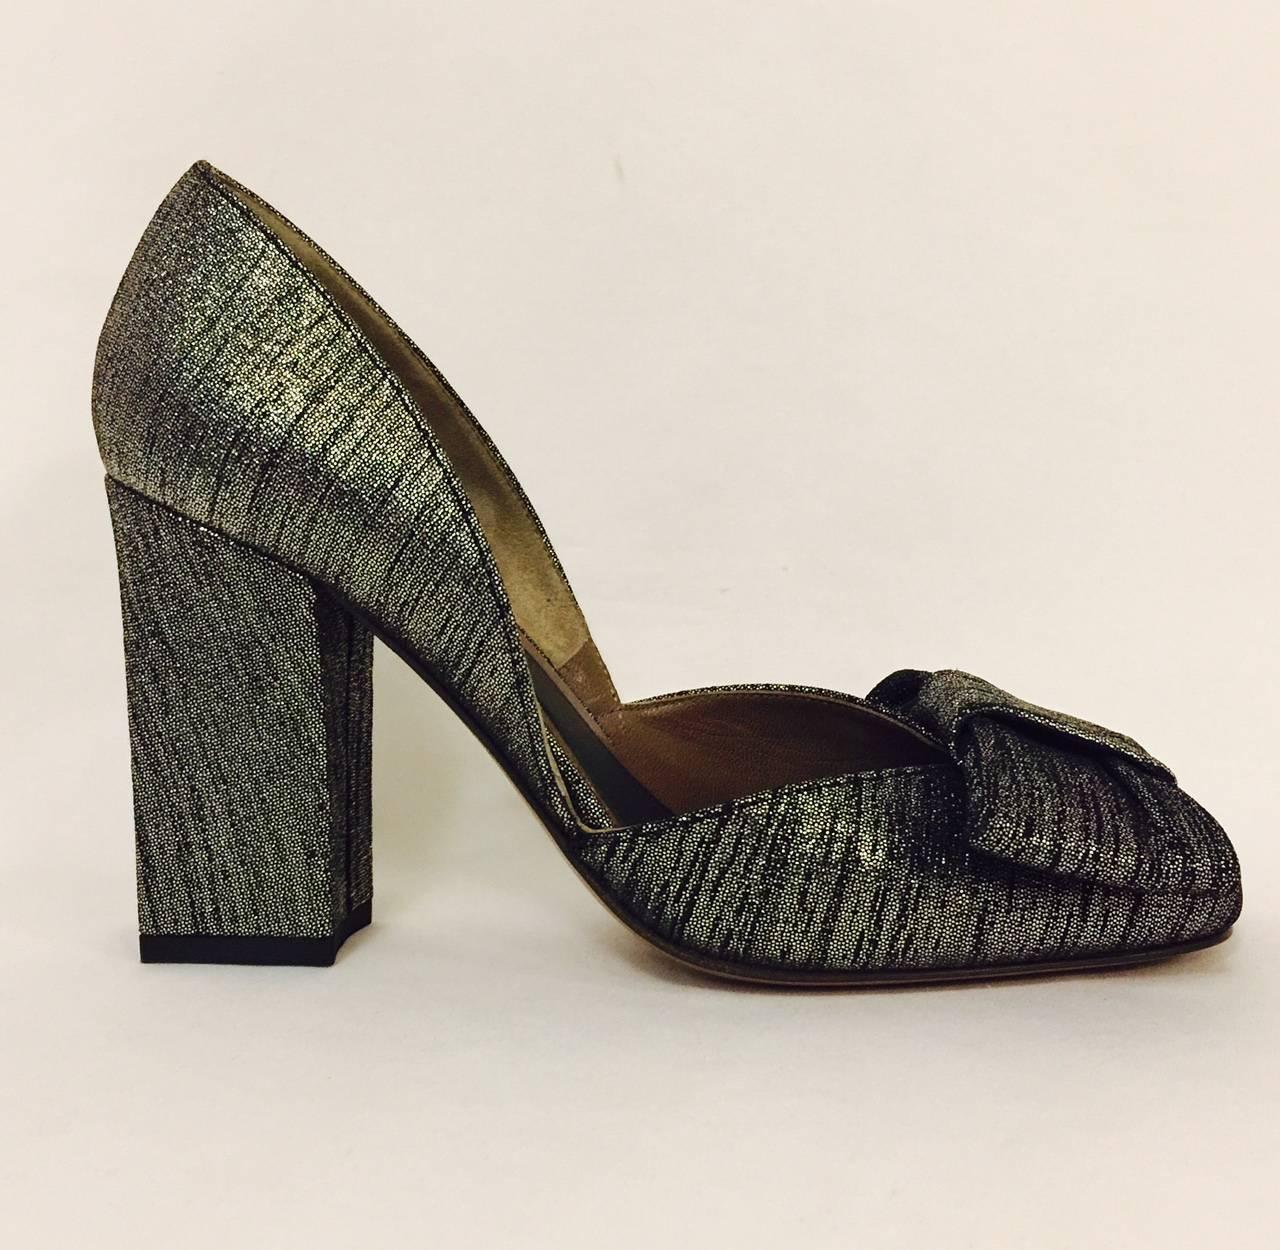 Marni New Black and Silver Metallic Suede Evening Pumps With Bow  In New Condition For Sale In Palm Beach, FL